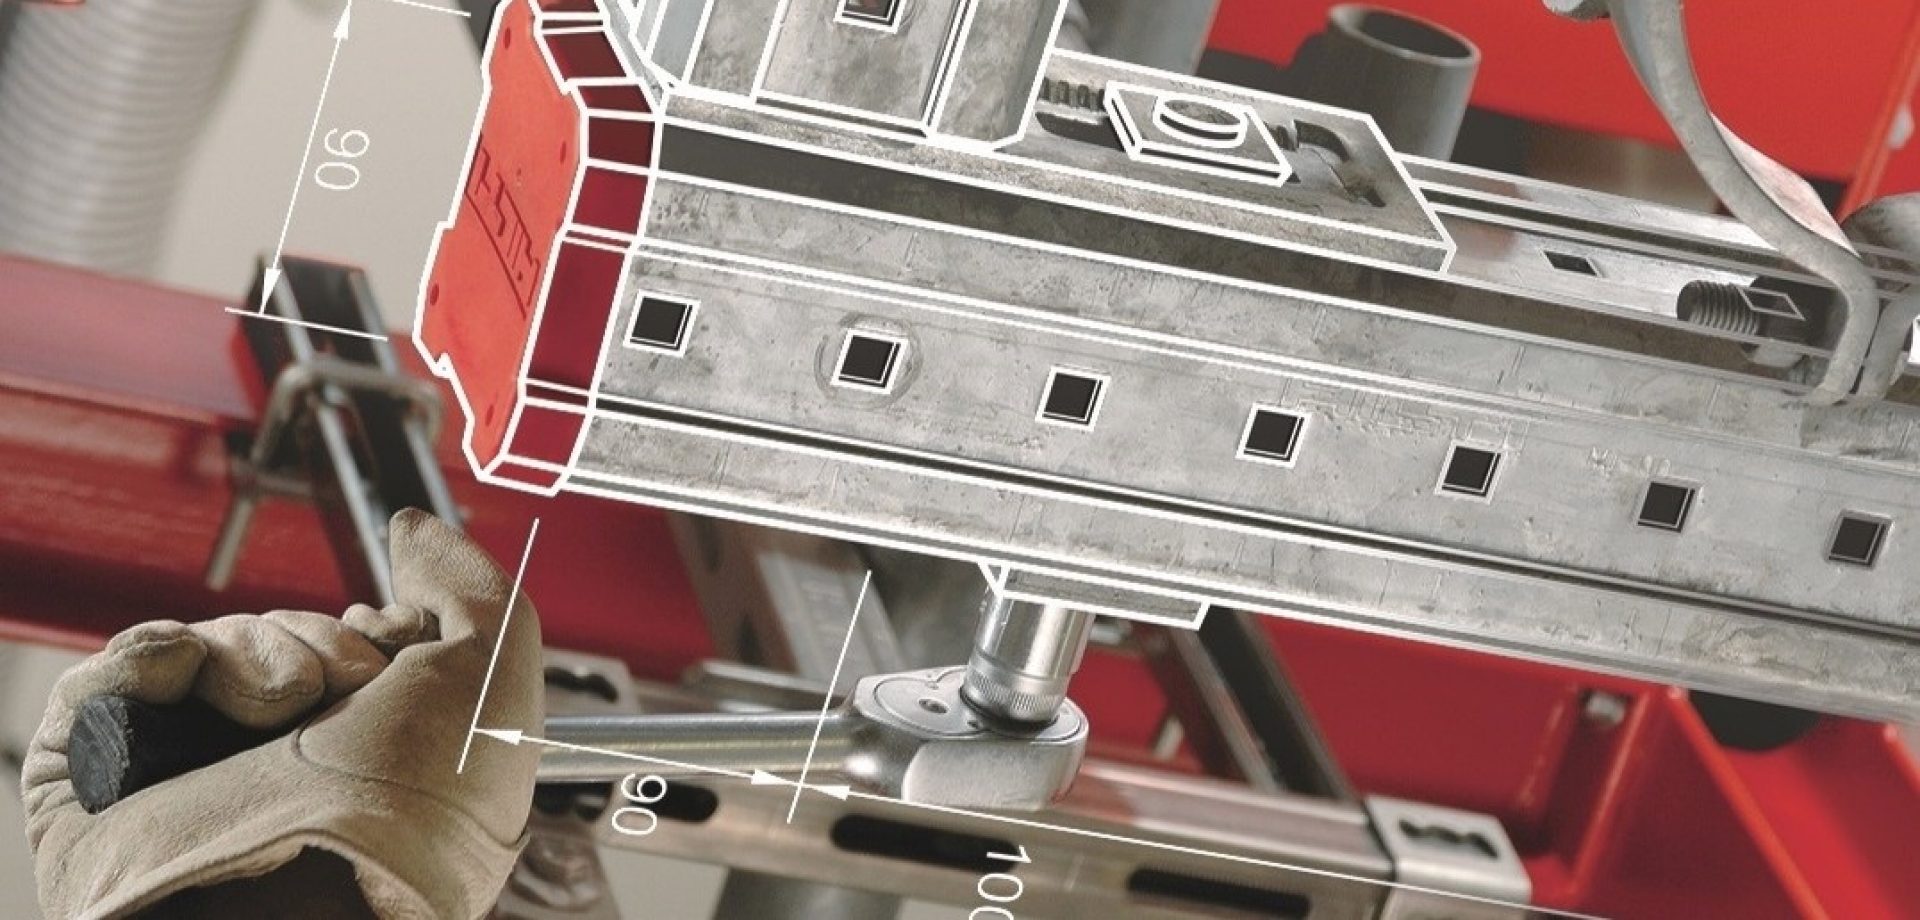 Hilti PROFIS installation software for modular support systems